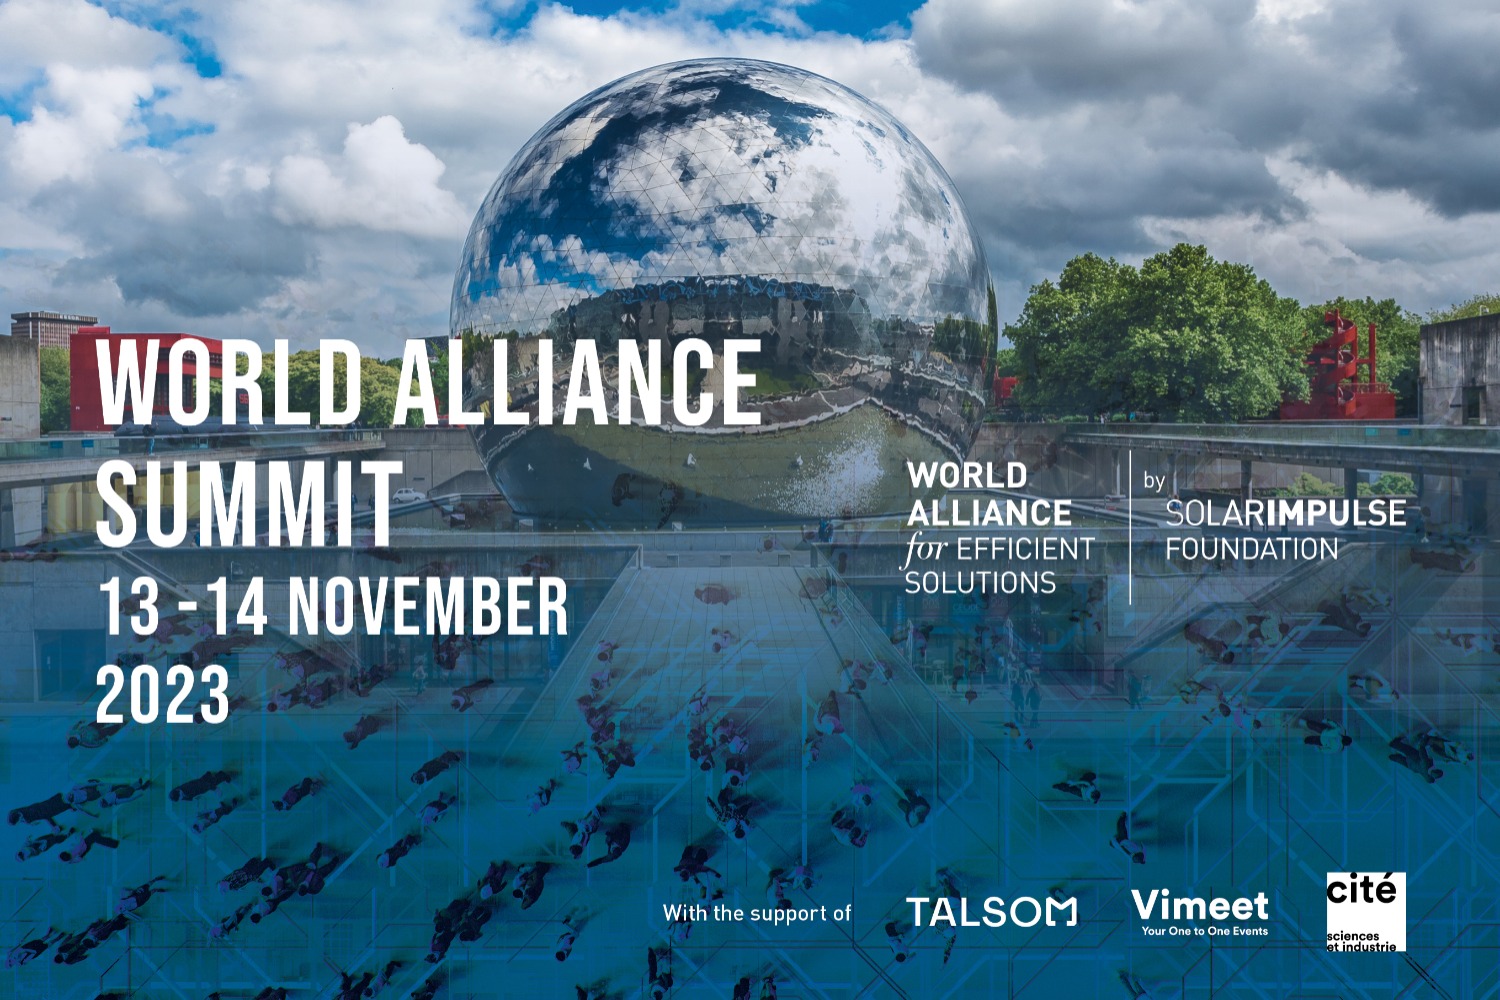 World Alliance for Efficient Solutions Summit